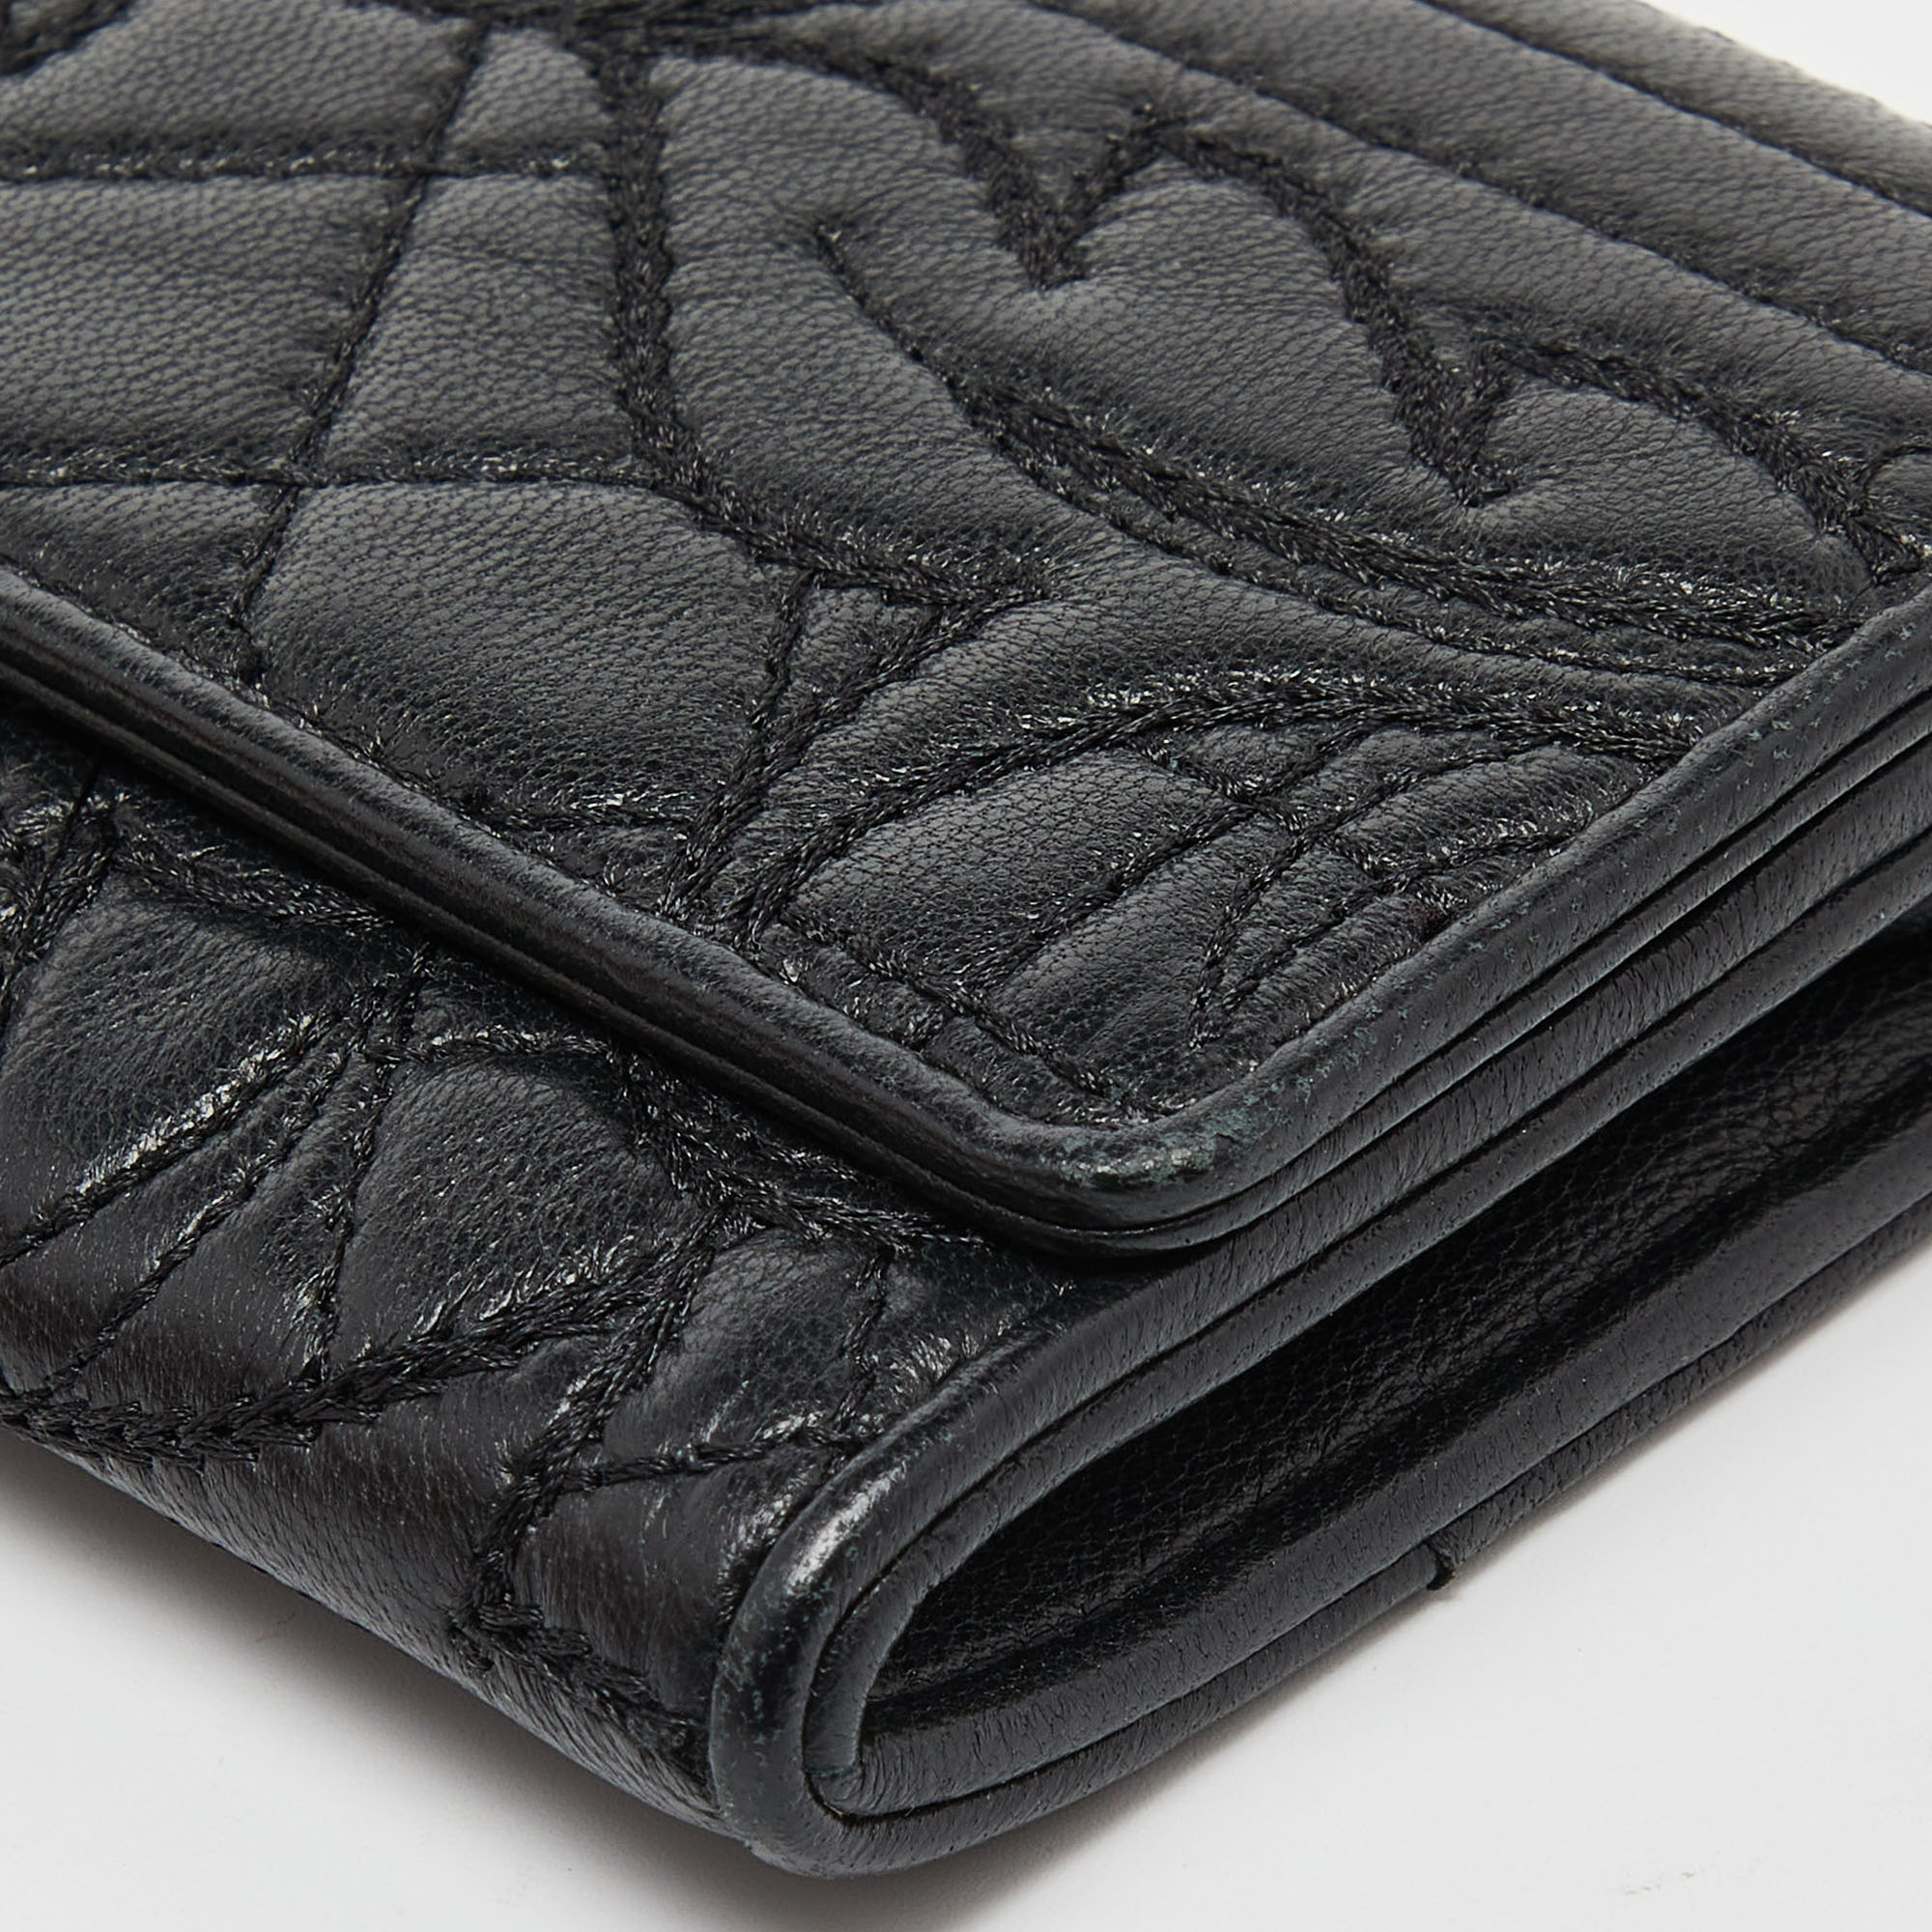 Versace Black Quilted Leather Flap Continental Wallet